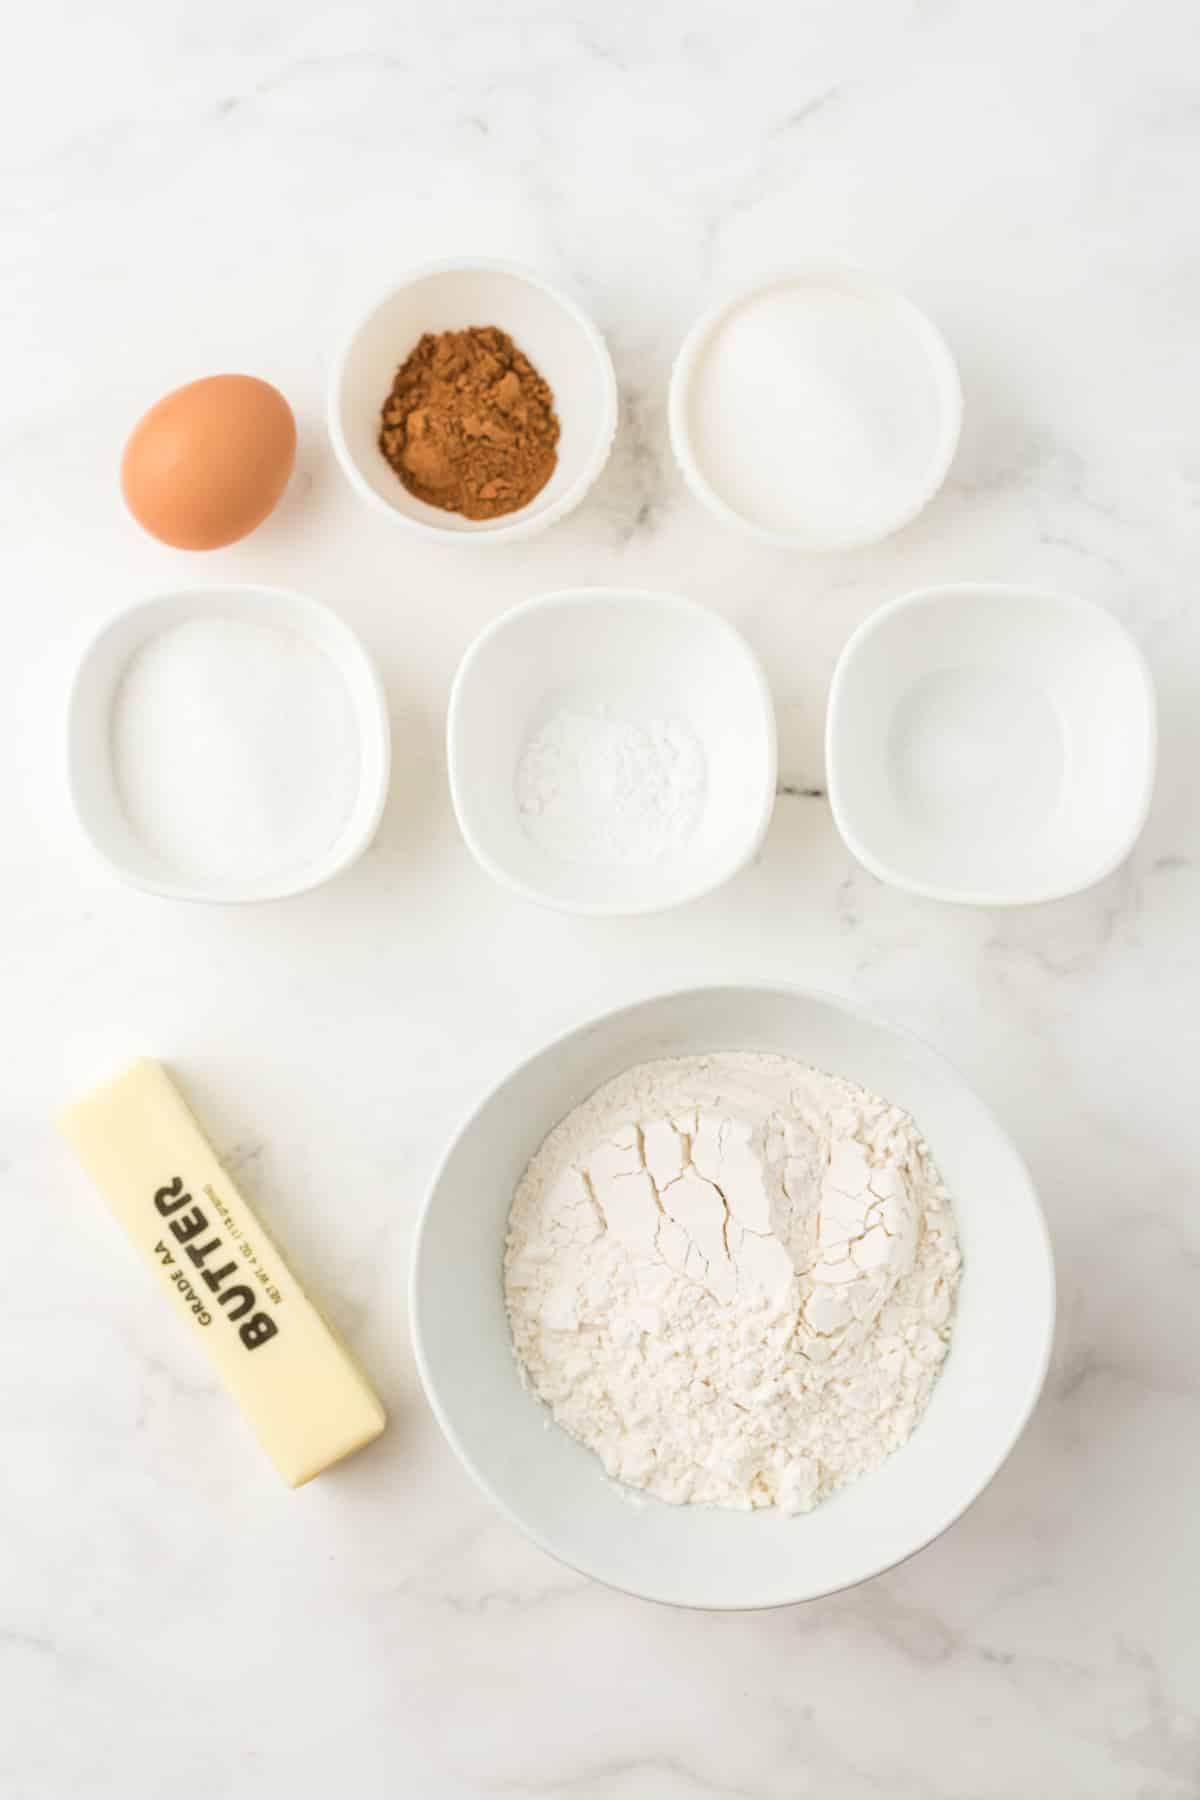 Ingredients for Pumpkin Snickerdoodles recipe on a white counter. These are the following: ½ Cup Butter – softened , ½ Cup Brown Sugar, ¼ Cup White Sugar , 1/3 Cup Pumpkin Puree, 1 tsp Vanilla, 1 ½ Cup Flour , 1 ½ tsp Pumpkin Spice, 1 tsp Cream of Tartar, ½ tsp Baking Soda, ¼ tsp Salt For rolling the cookie the ingredients are: ¼ Cup Sugar, 2 tsp Pumpkin Spice